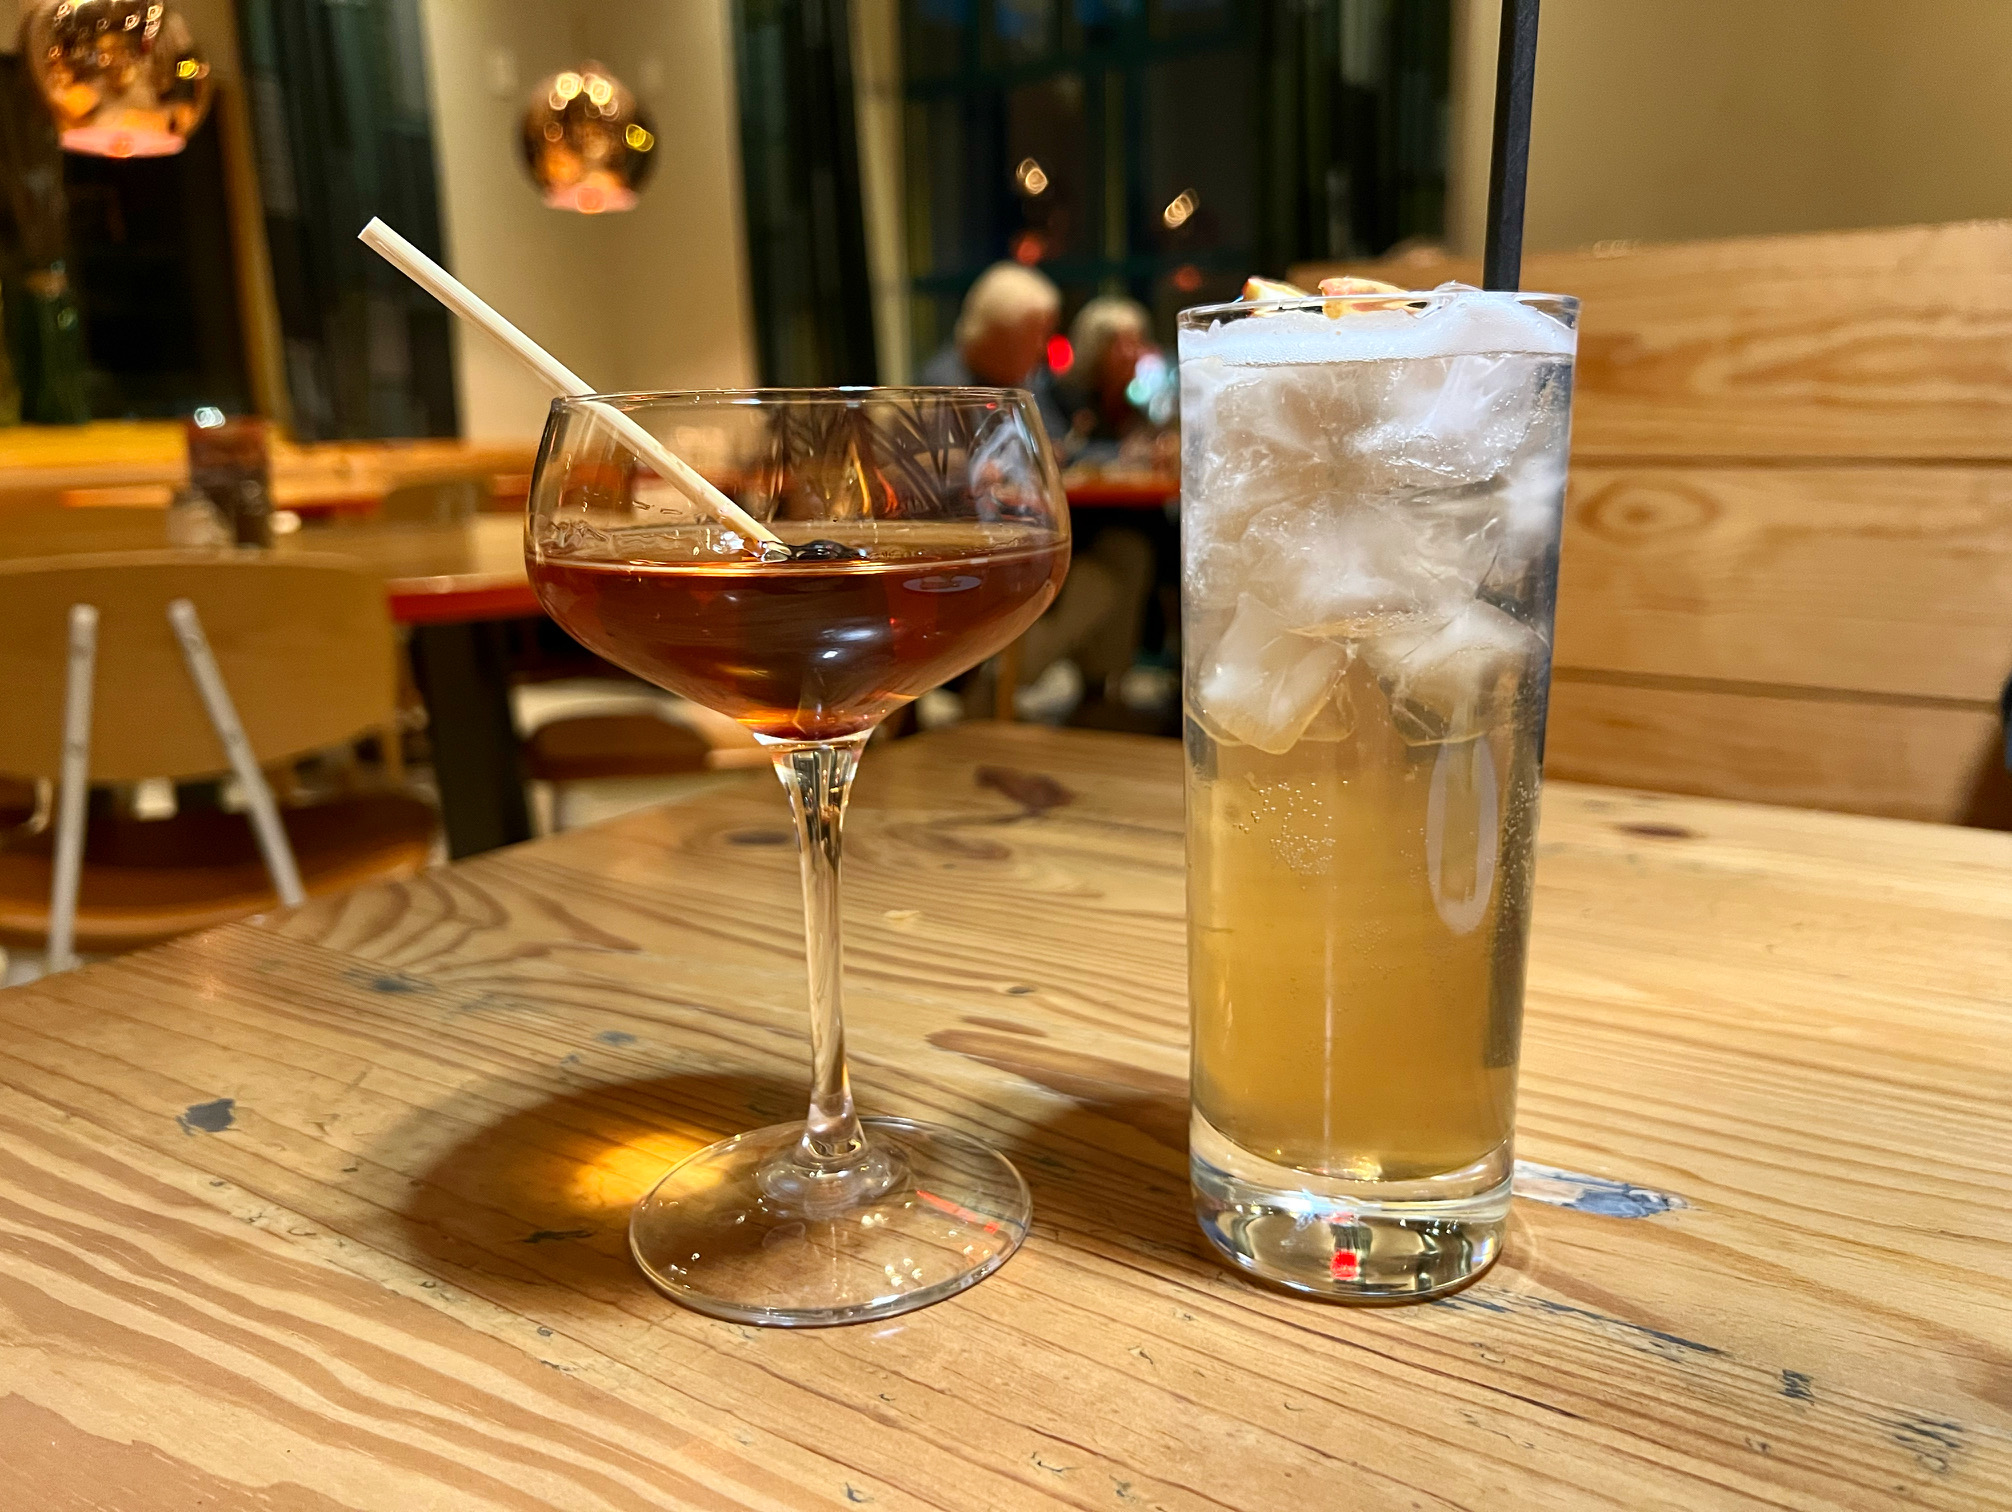 On a wooden table at Everyday Kitchen, there are two cocktails from the fall menu. Photo by Alyssa Buckley.